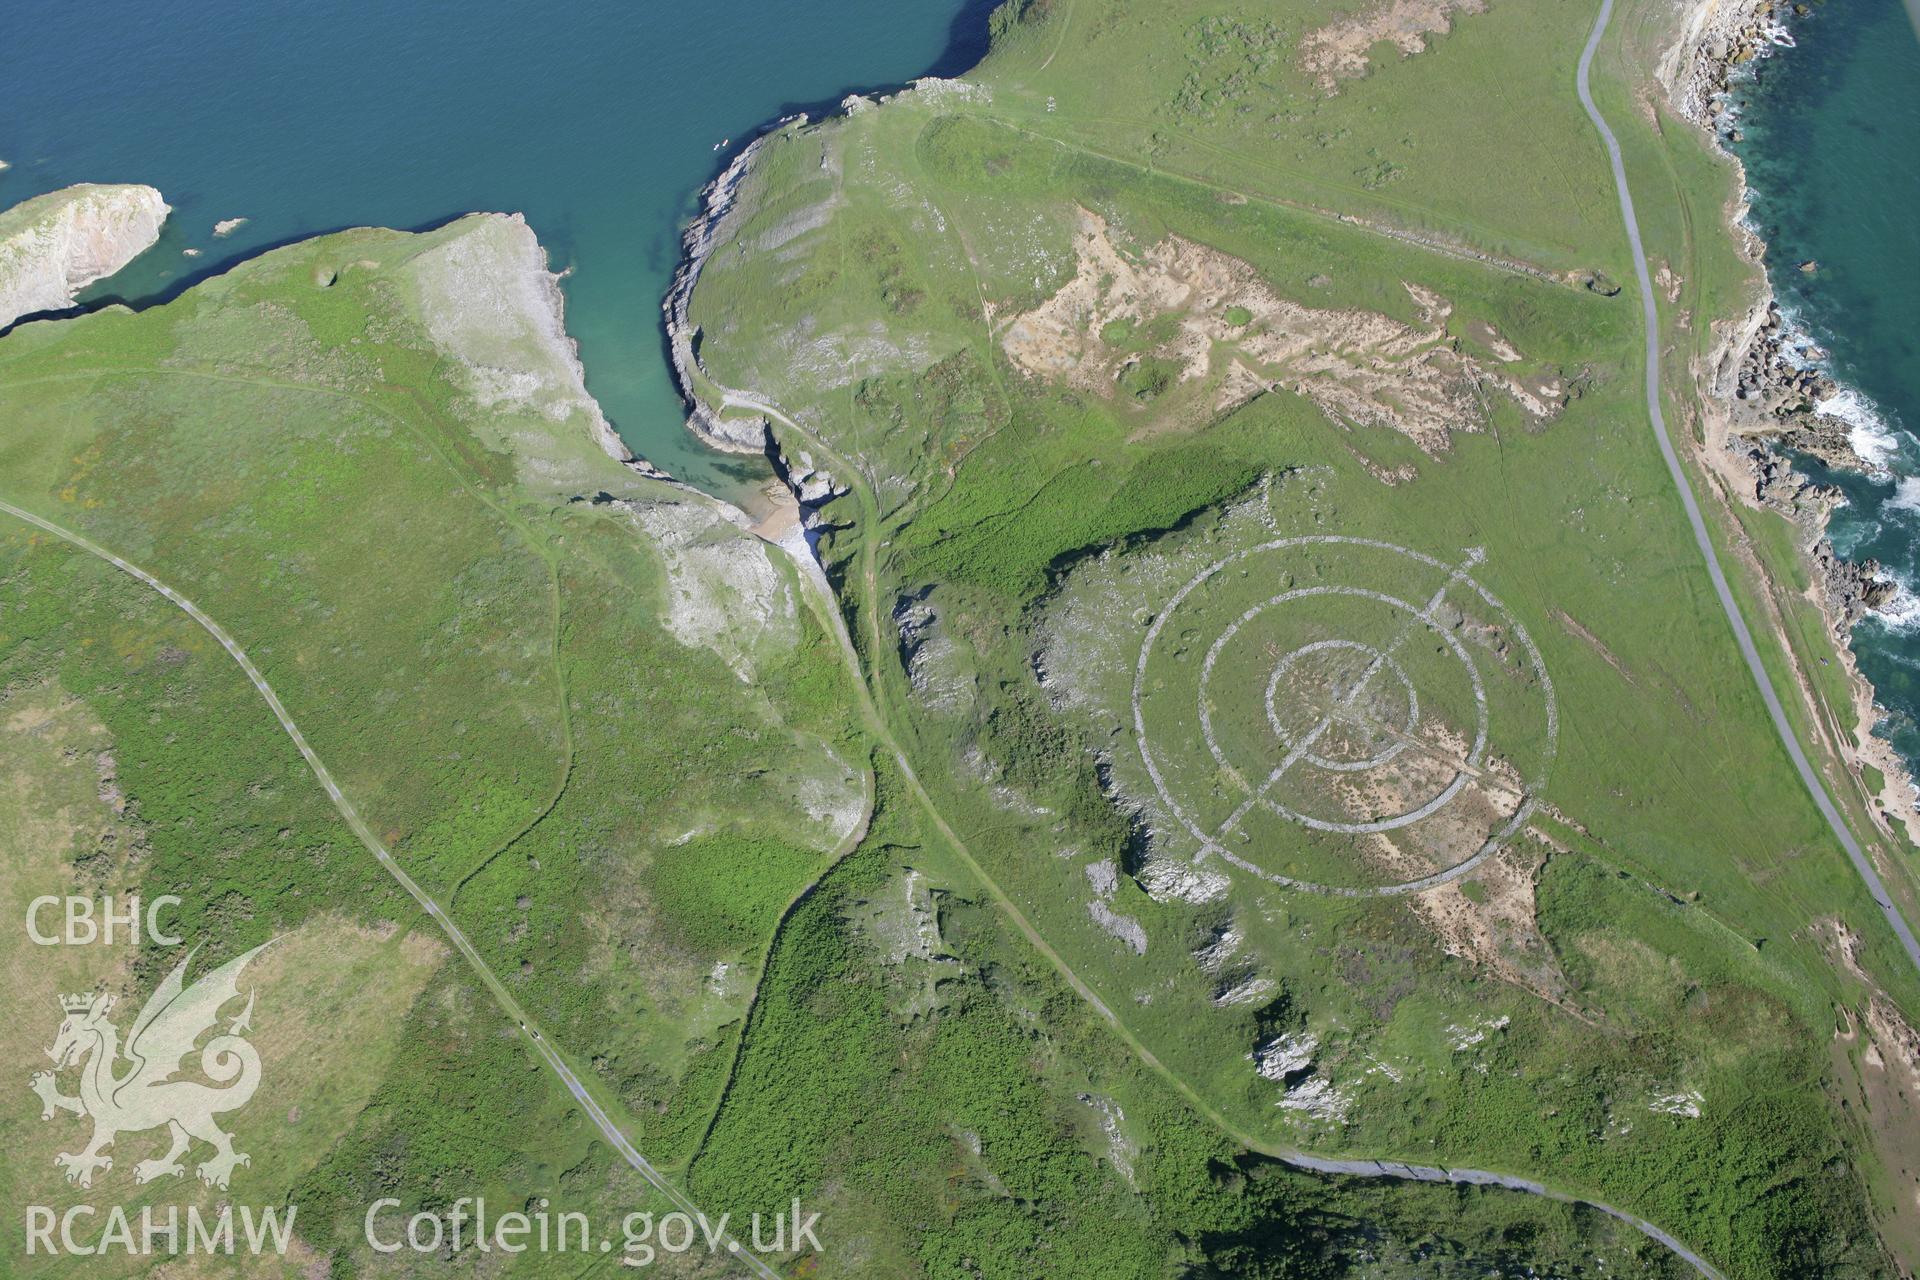 RCAHMW colour oblique aerial photograph of an aerial bombing target for RAF Brawdy on Trevallen Downs, St Govan's Head. Taken on 30 July 2007 by Toby Driver